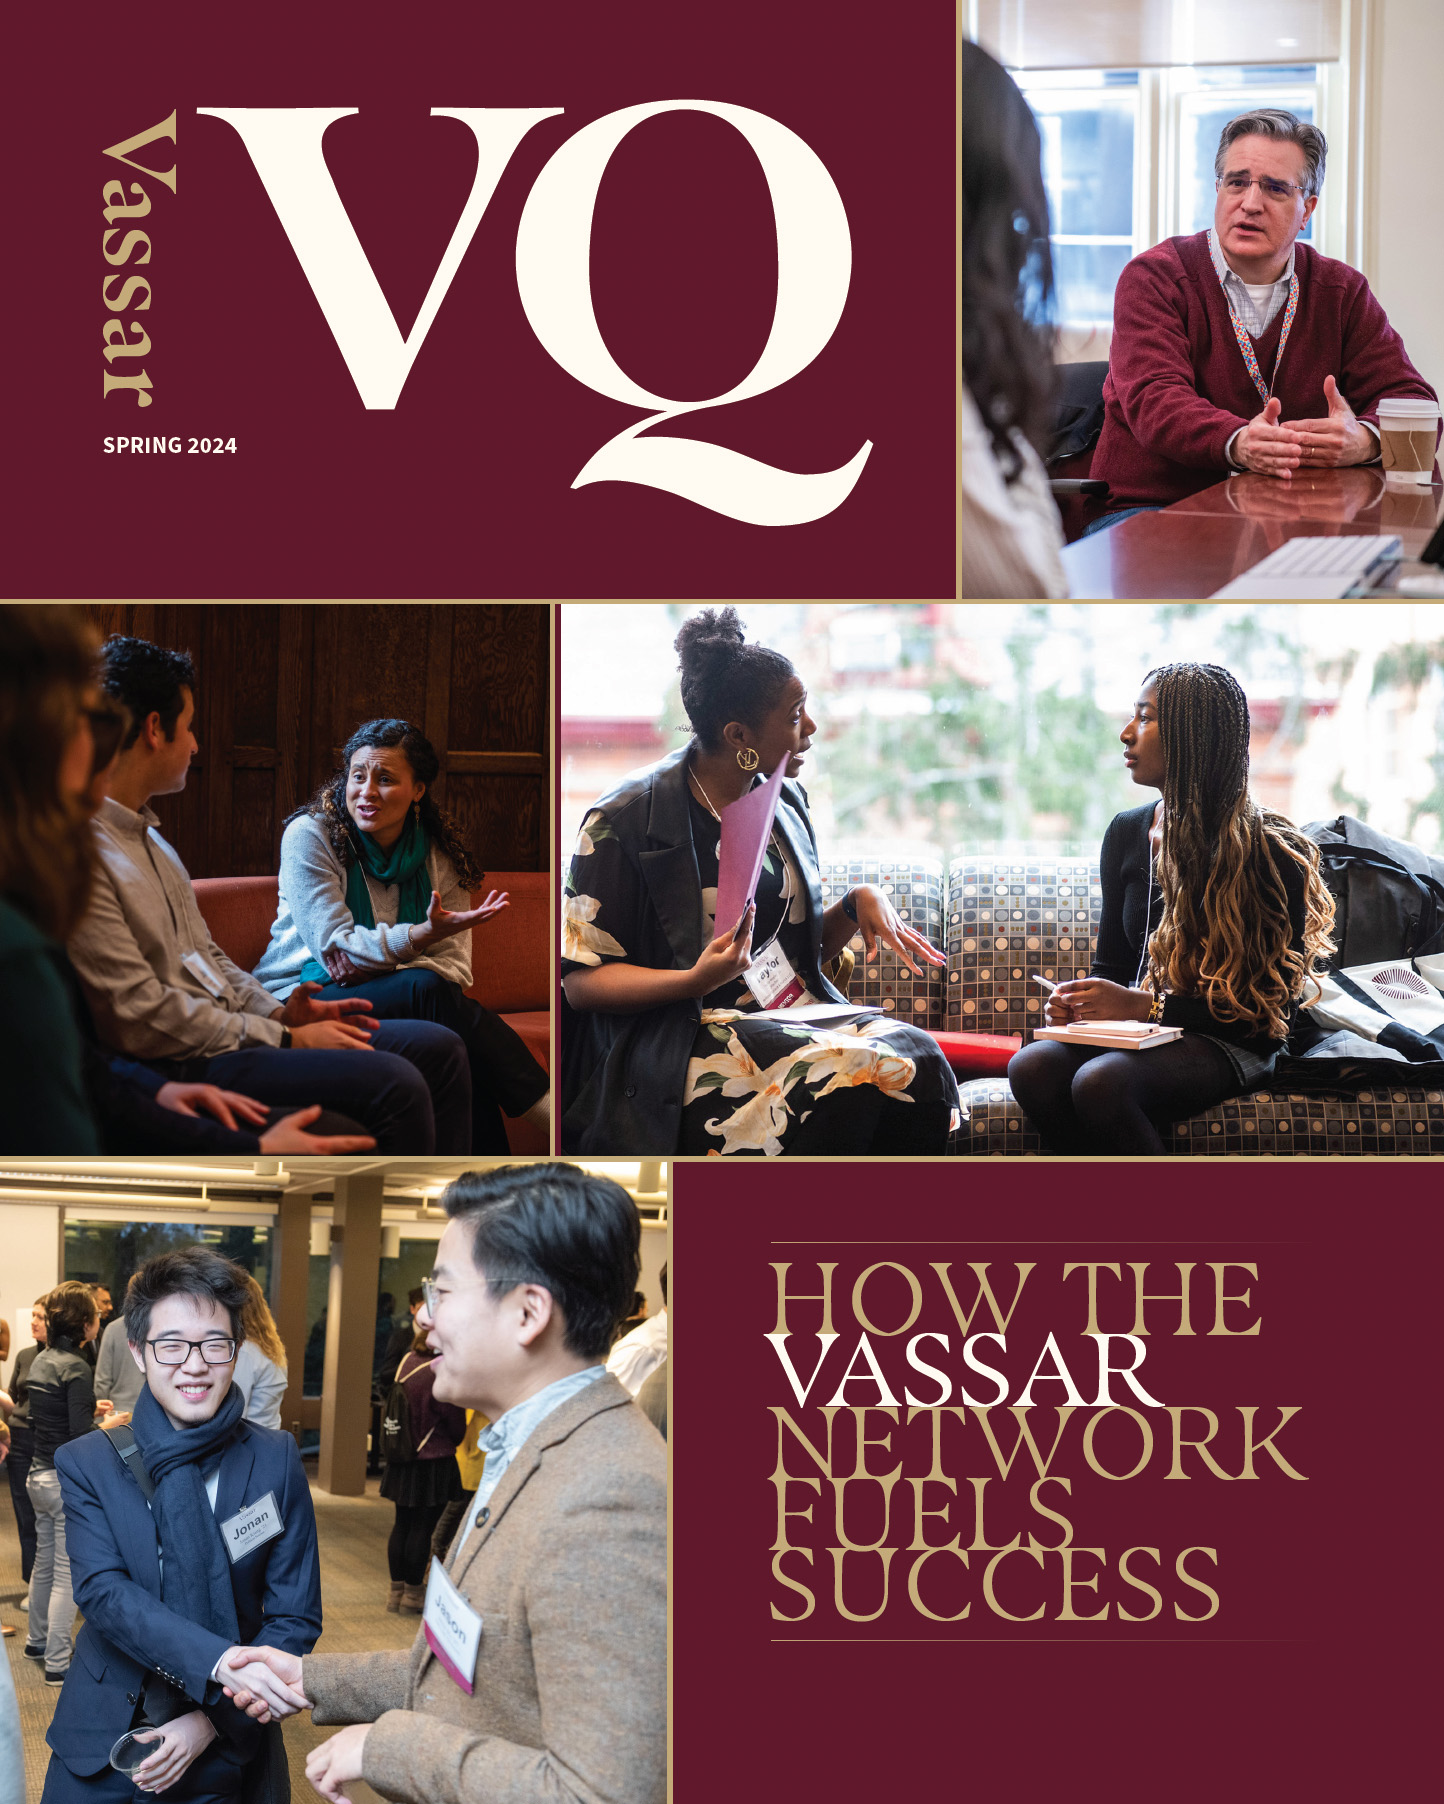 Magazine Cover Image of VQ - The Vassar Quarterly: How the Vassar Network Fuels Success. Four colage images. Top: Person talking to another person at a table with a window in the background. Middle left: Two people sitting on a couch listening to another person speak. Middle right: Two people facing each other on a fancy couch while speaking. Bottom: Two people standing and shaking hands in a conference room with people in the background.